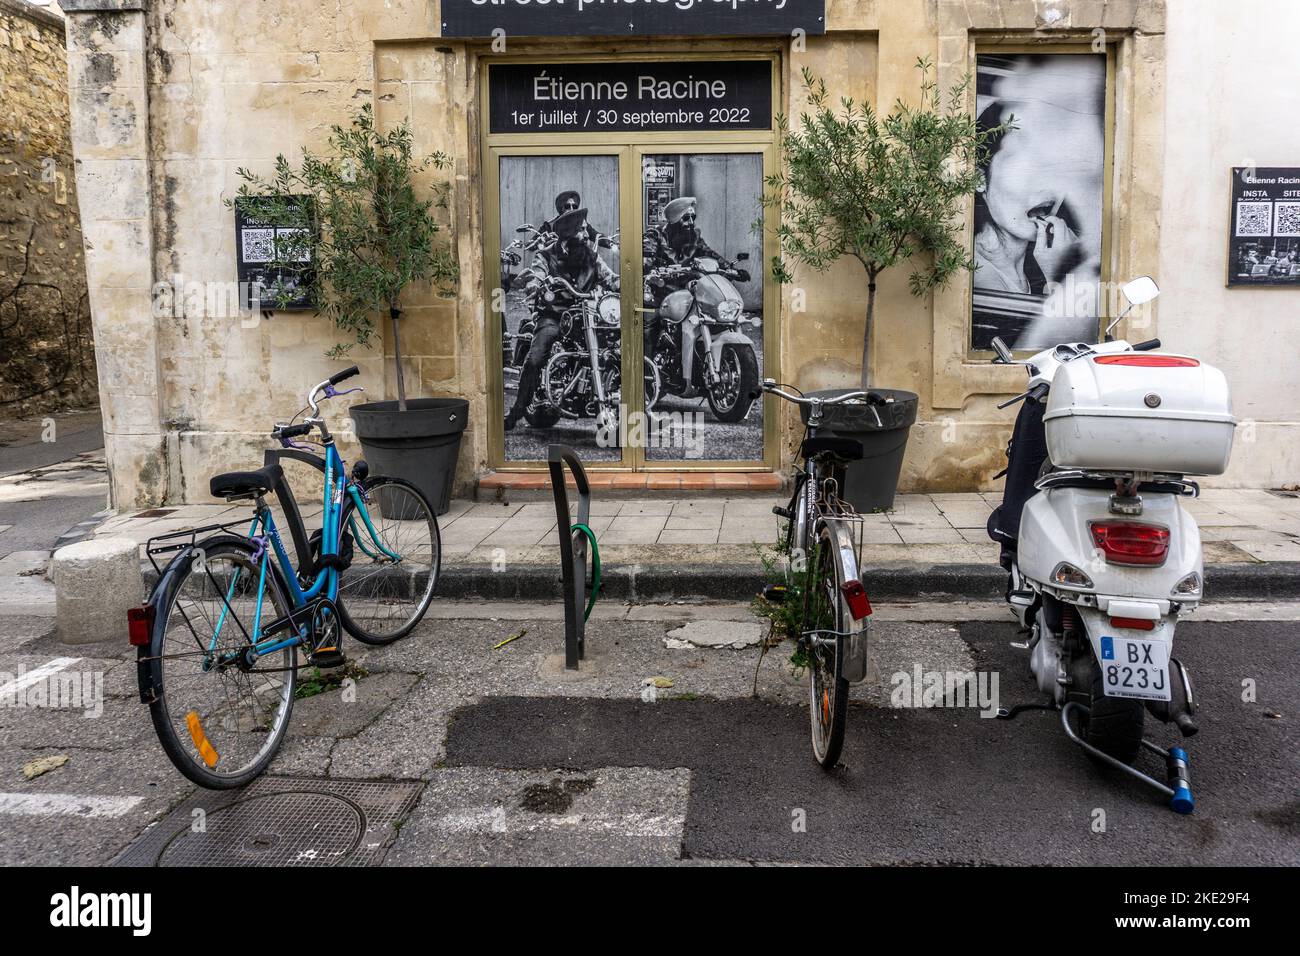 Two bikes and a scooter parked n front of a poster of an exhibition of street photography by Etienne Racine in Arles, France. Stock Photo